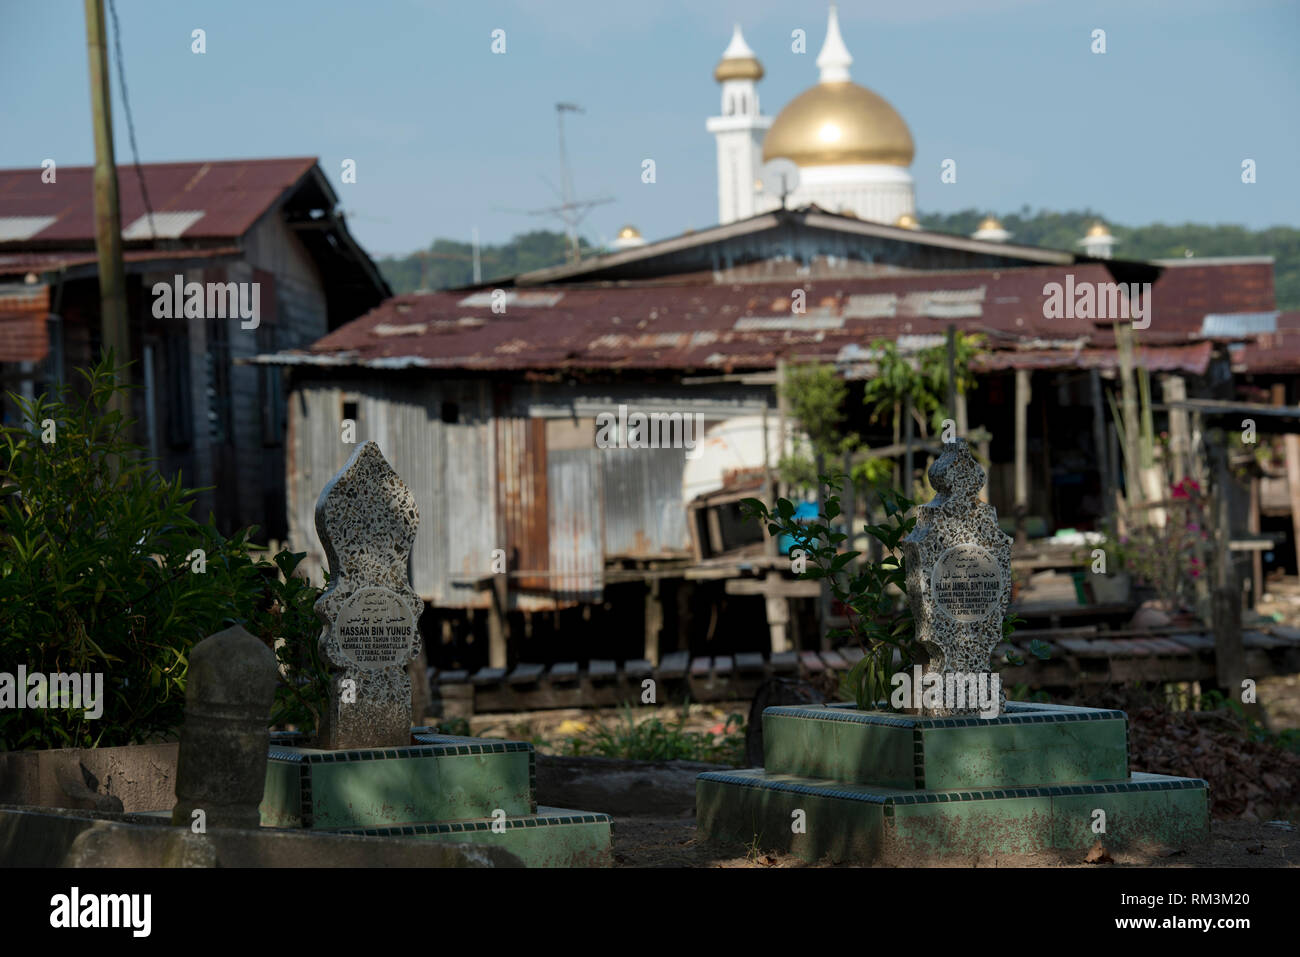 Shack and Mosque, Opulent Sultan Omar Ali Saifuddien Mosque with shack and gravestone in foreground, Bandar Seri Begawan, Brunei Stock Photo